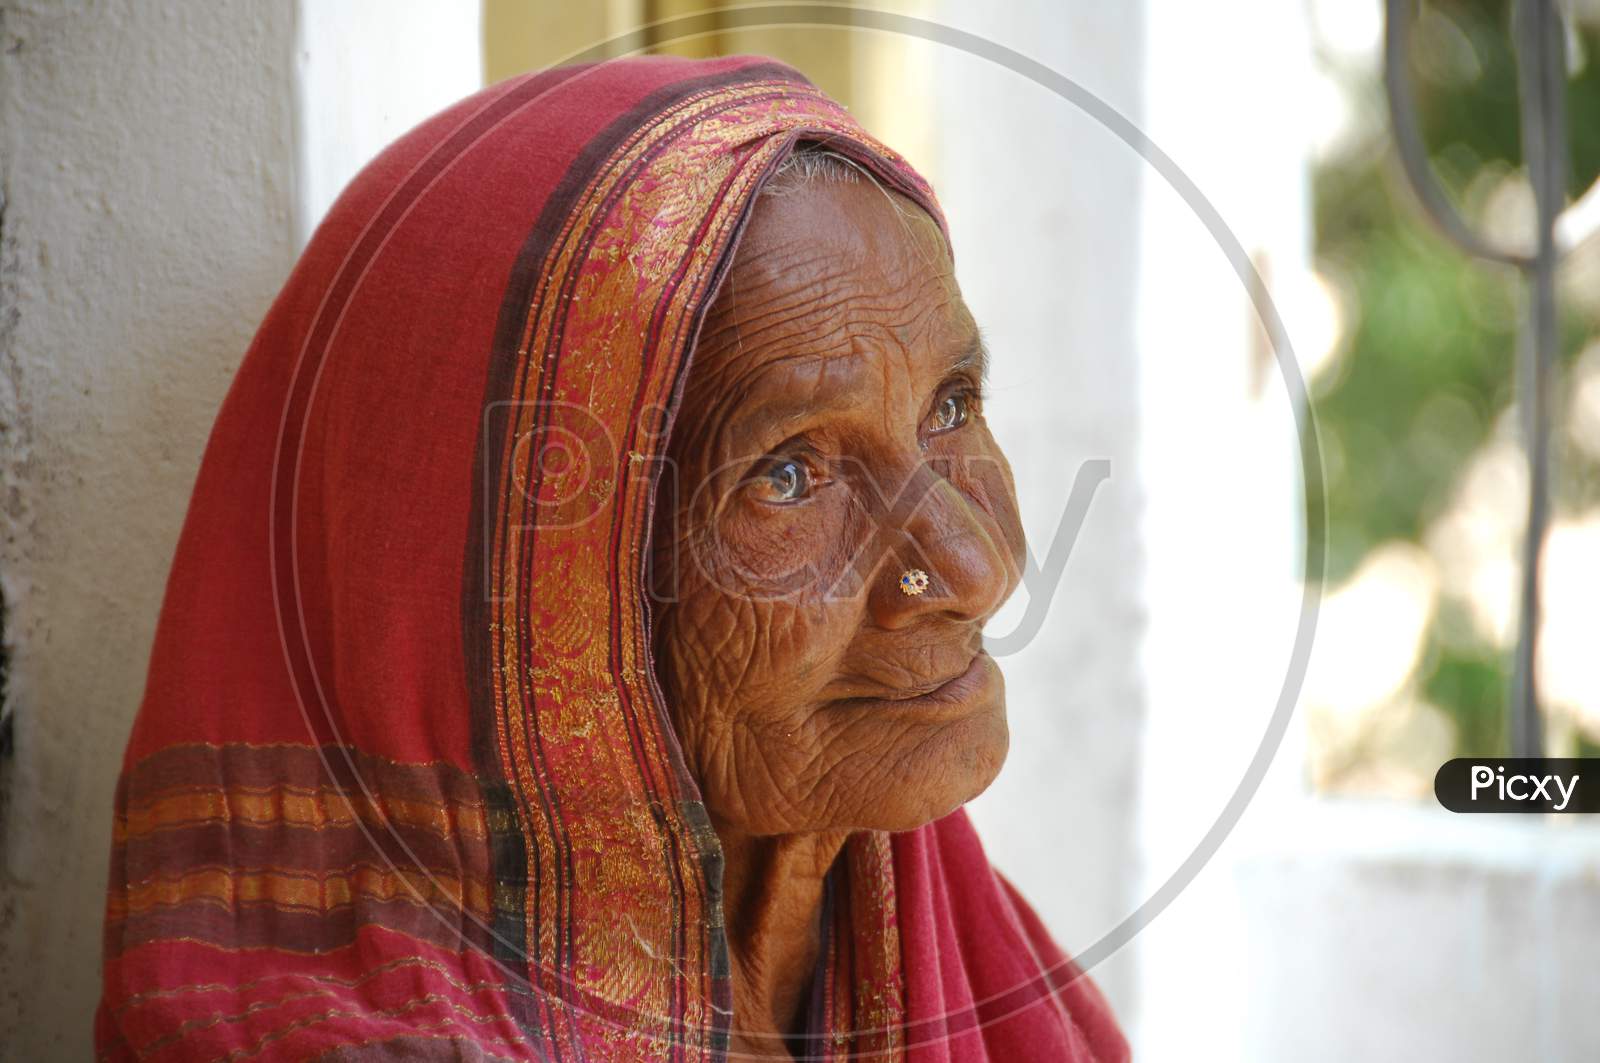 Indian Elderly Woman Standing at a Rural Village House